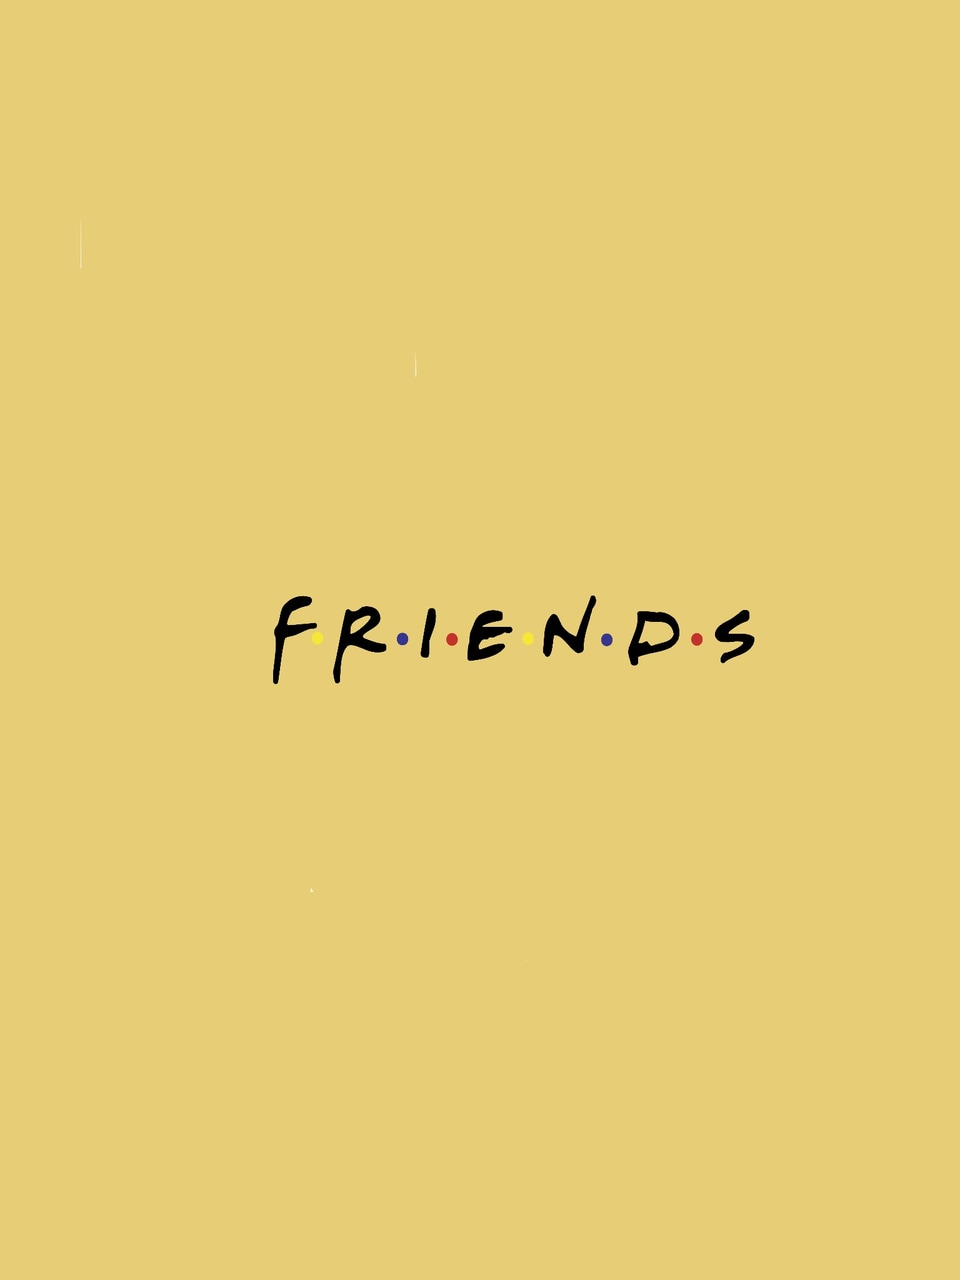 Background, Gold, And Wallpaper Image - Friends - 960x1280 Wallpaper -  